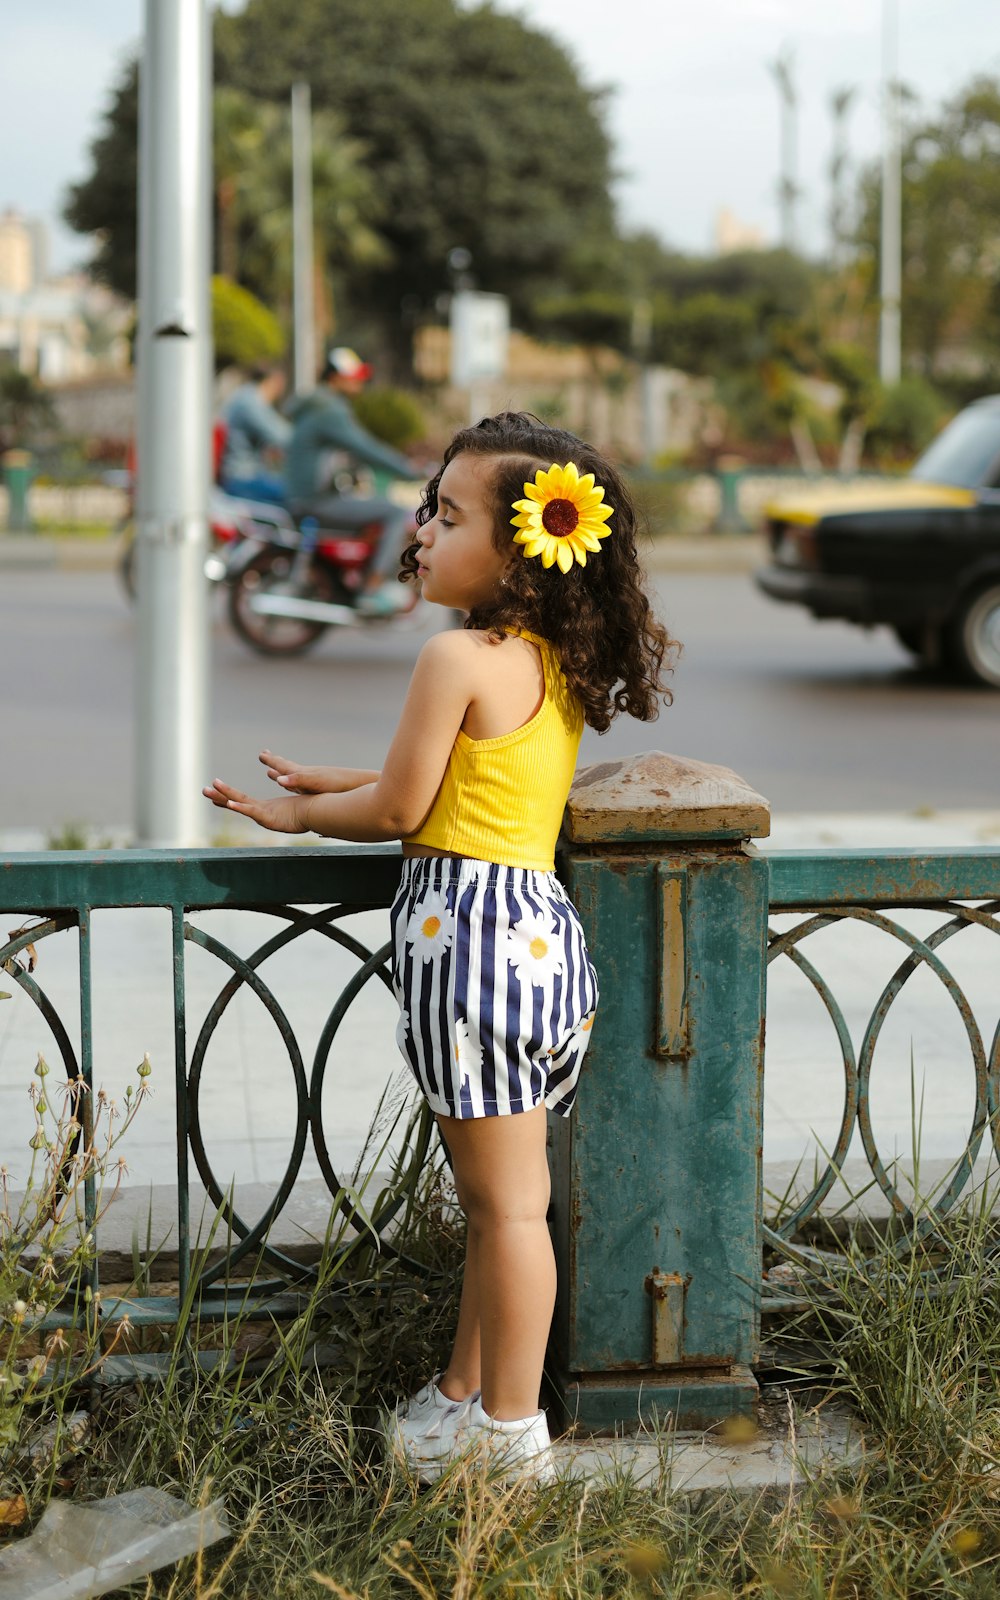 a little girl standing next to a fence with a sunflower in her hair